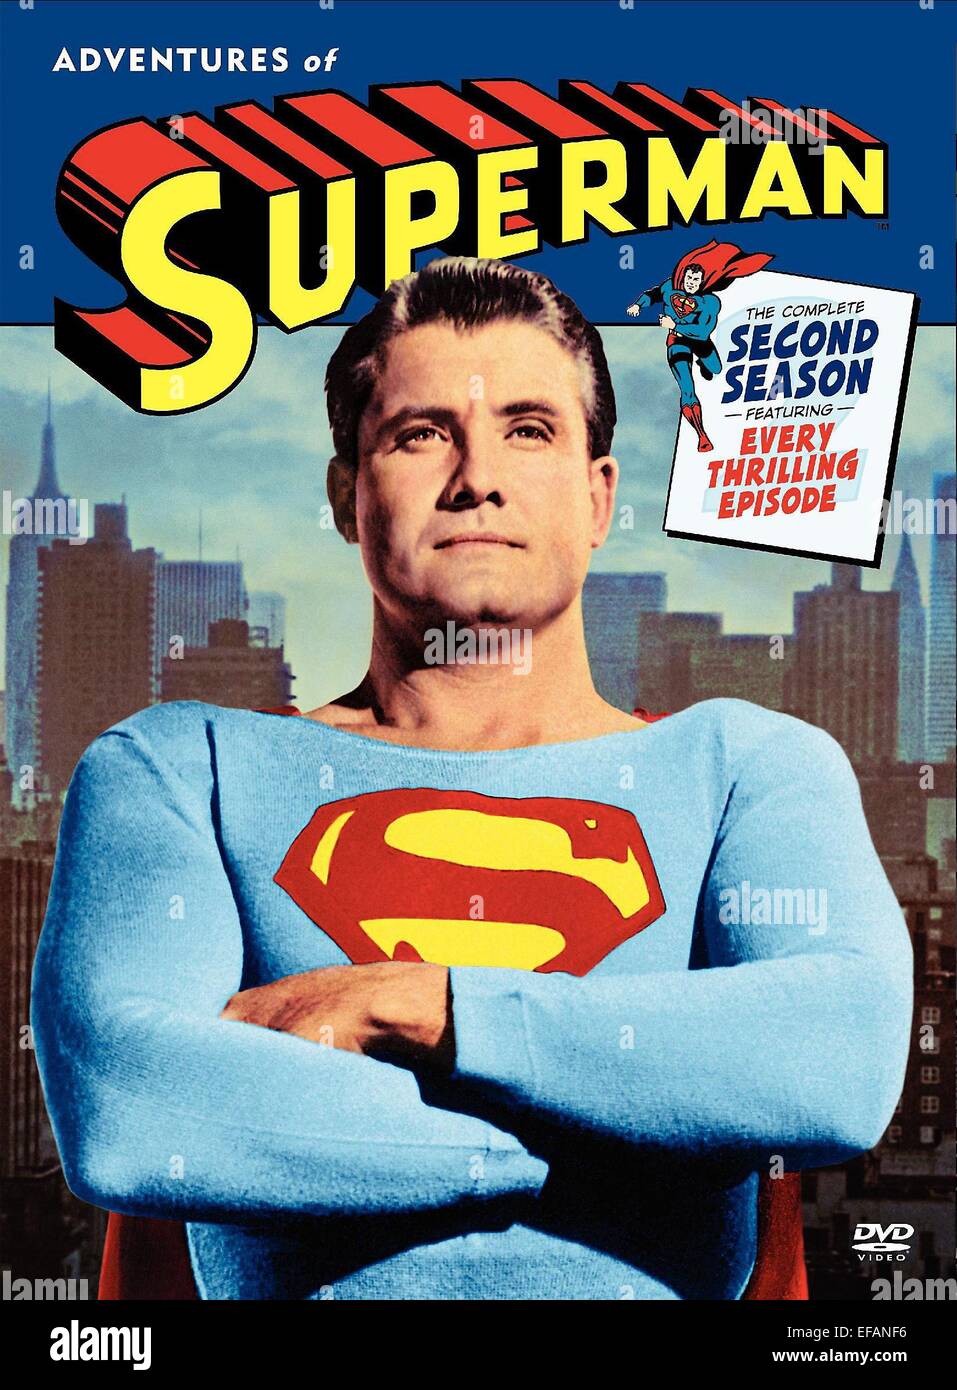 GEORGE REEVES POSTER ADVENTURES OF SUPERMAN (1952) Stock Photo